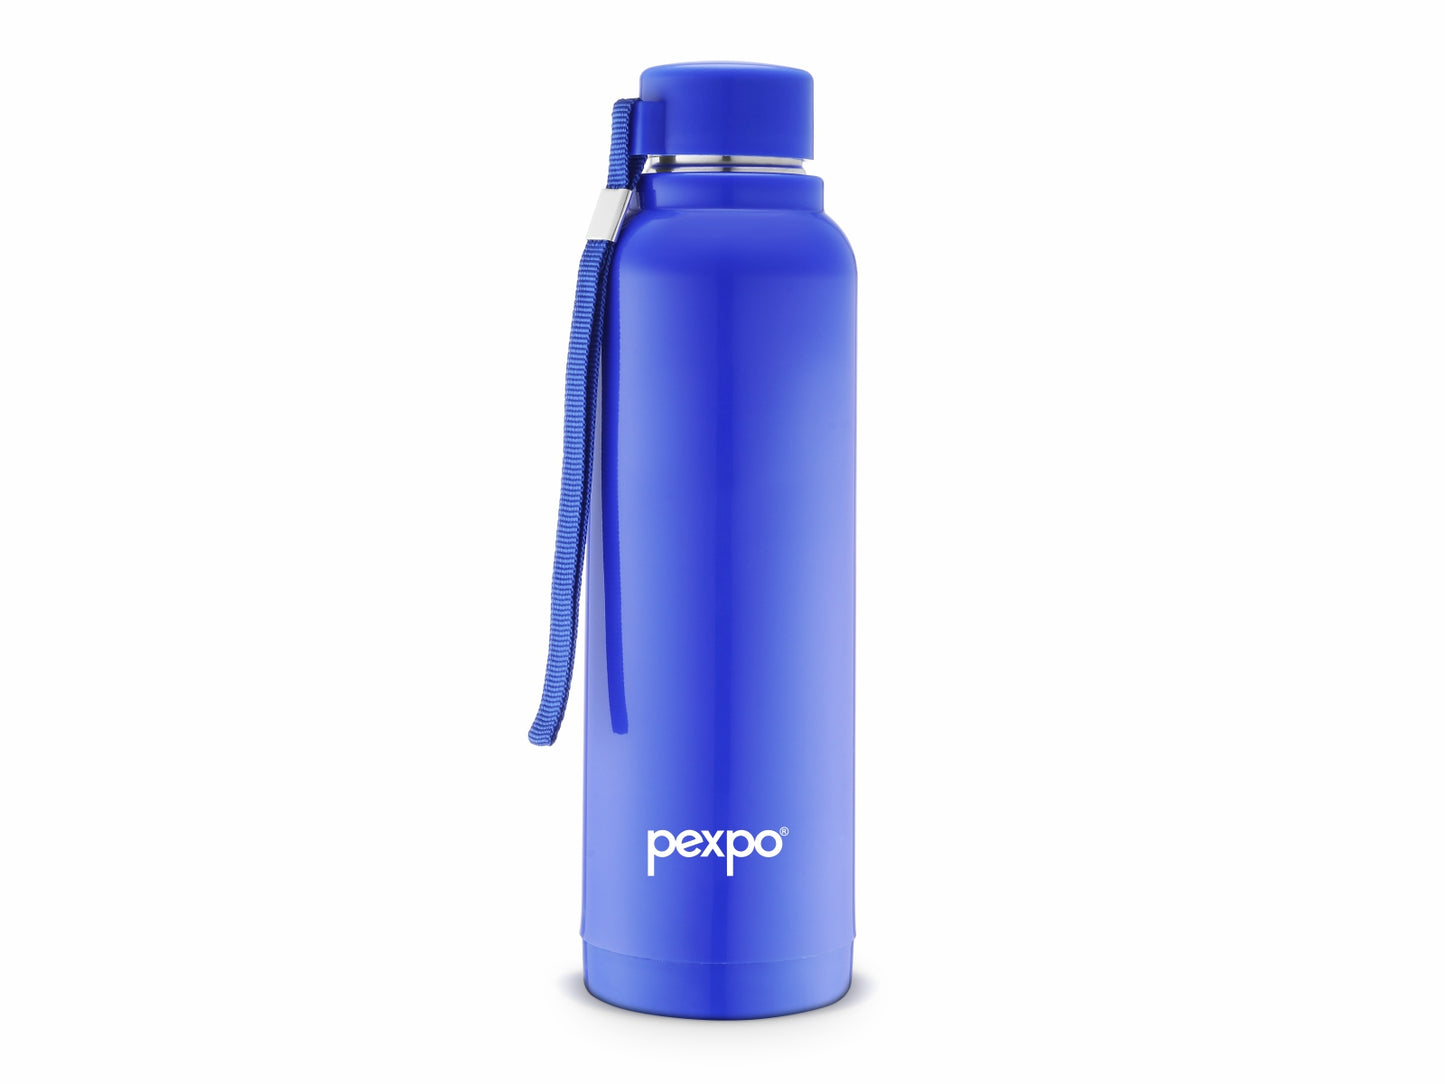 Pexpo Stereo-PU Insulated 4 Hours Warm & Cold  700 ml | Safe & Portable (Stainless Steel)